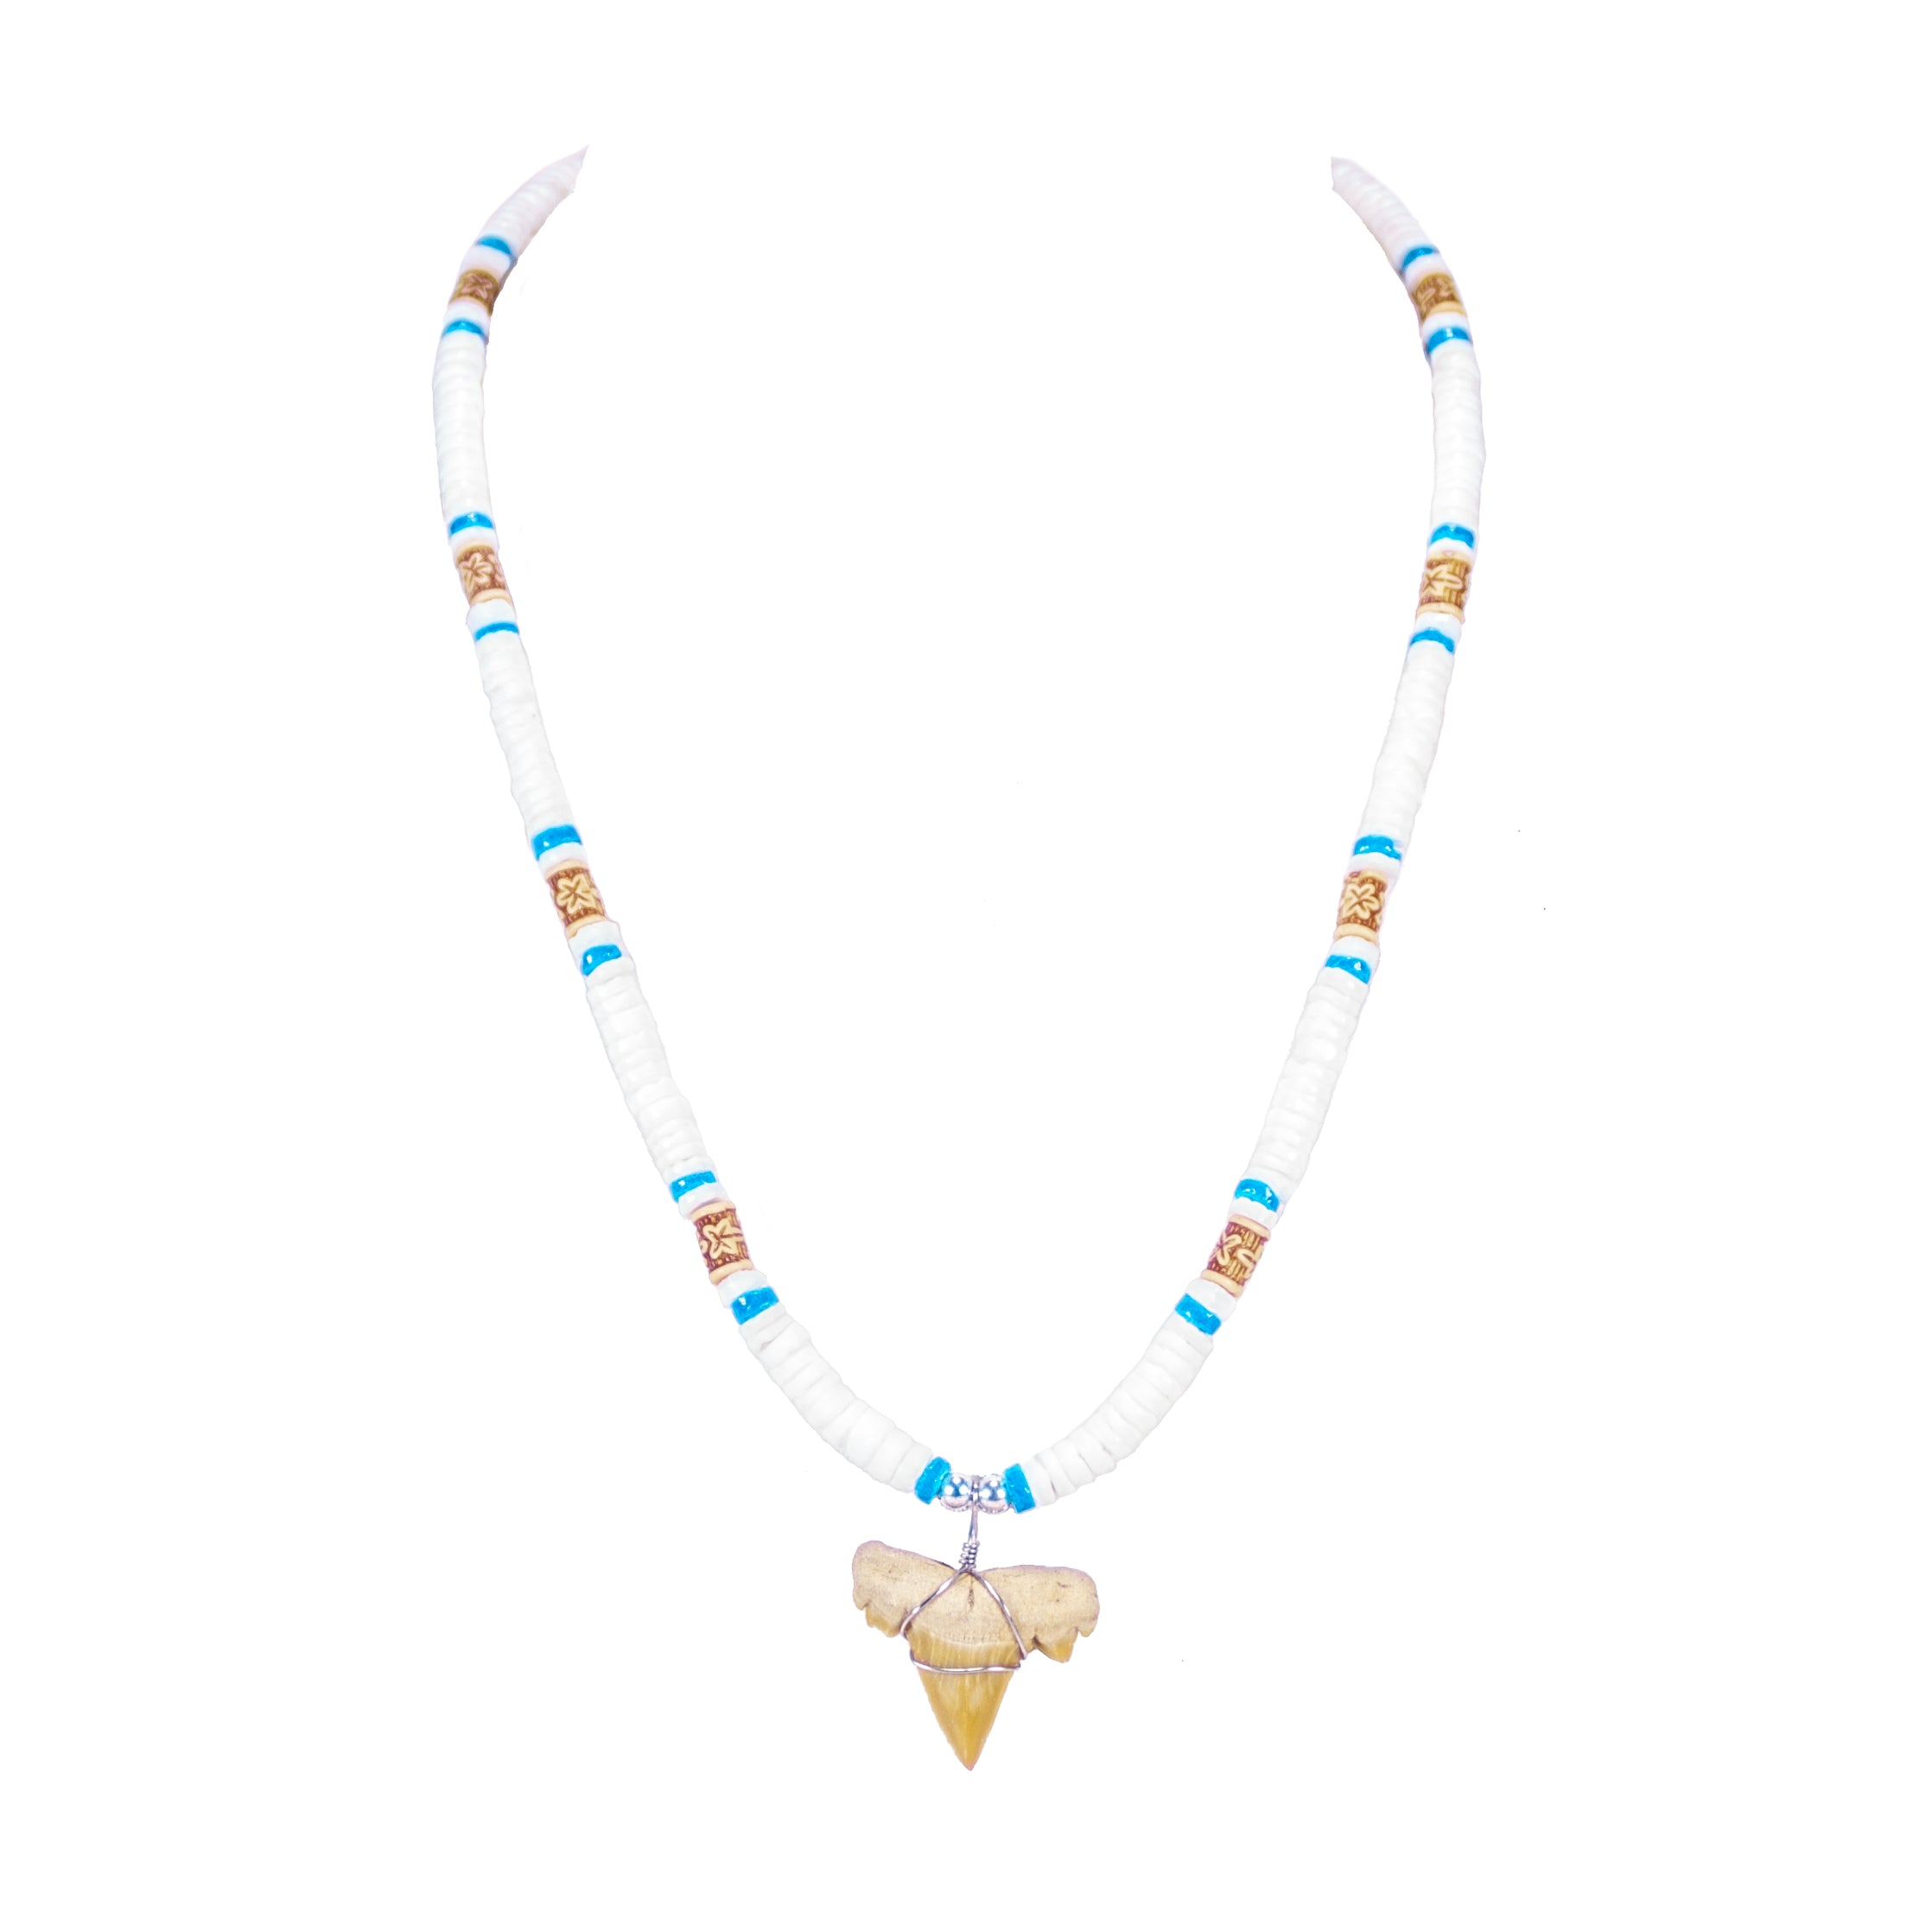 1"+ Shark Tooth Pendant on White and Blue Puka Shell Beads Necklace